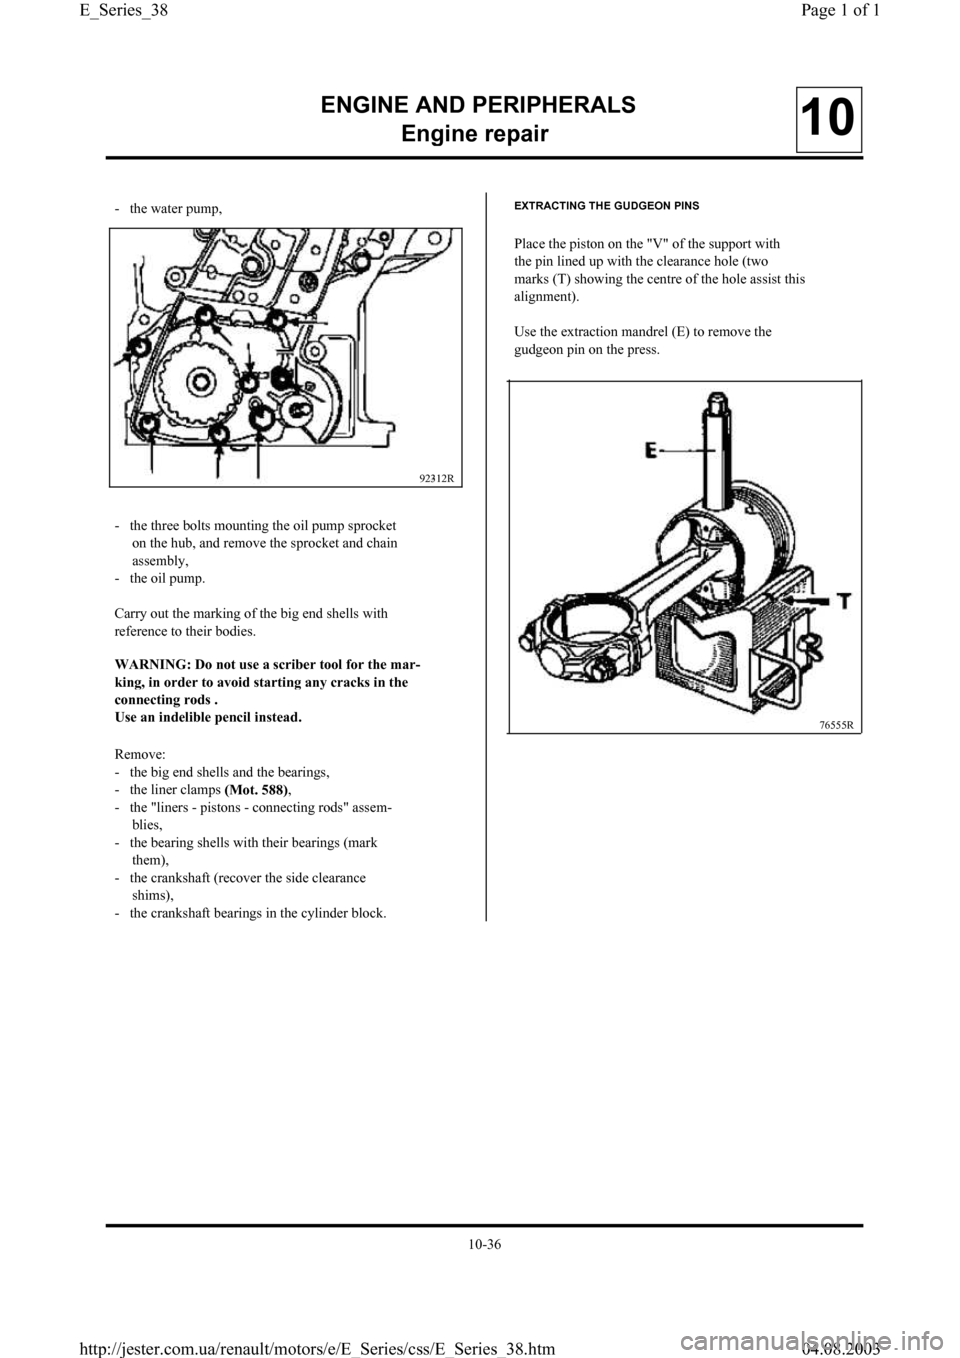 RENAULT CLIO 1997 X57 / 1.G Petrol Engines Workshop Manual ENGINE AND PERIPHERALS
En
gine repair10
-   the water pump,
92312R
-   the three bolts mounting the oil pump sprocket
on the hub, and remove the sprocket and chain
assembly,
-   the oil pump.
Carry ou